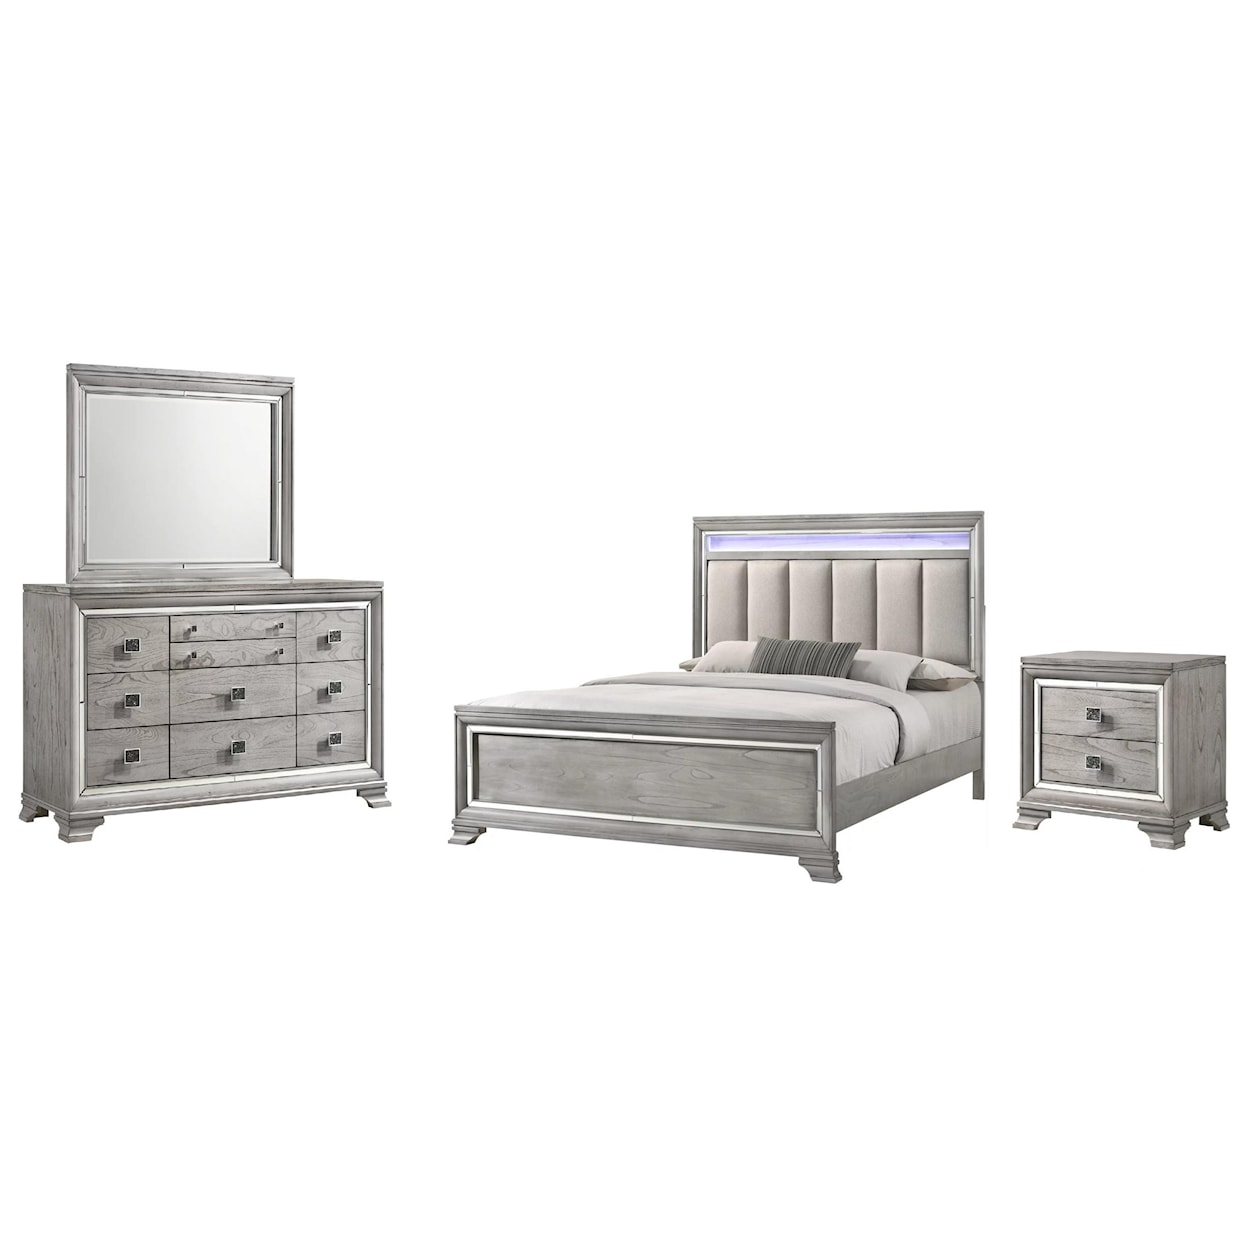 CM Vail B7200-4PC-Q Queen Bed Dresser Mirror and 1 Nightstand | Del Sol ...